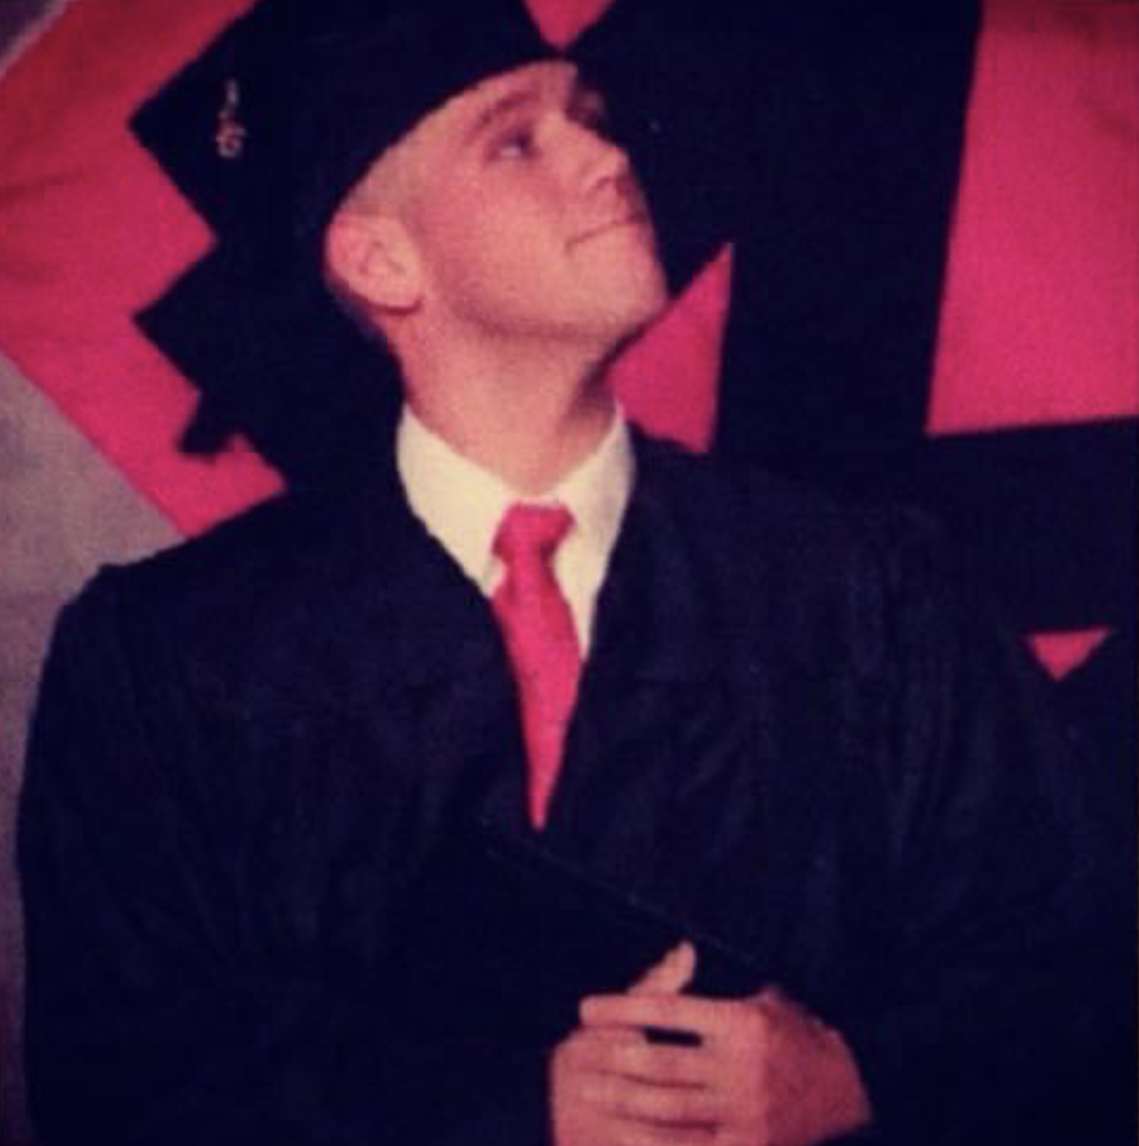 Zachary Grimm on graduation day in 2012.